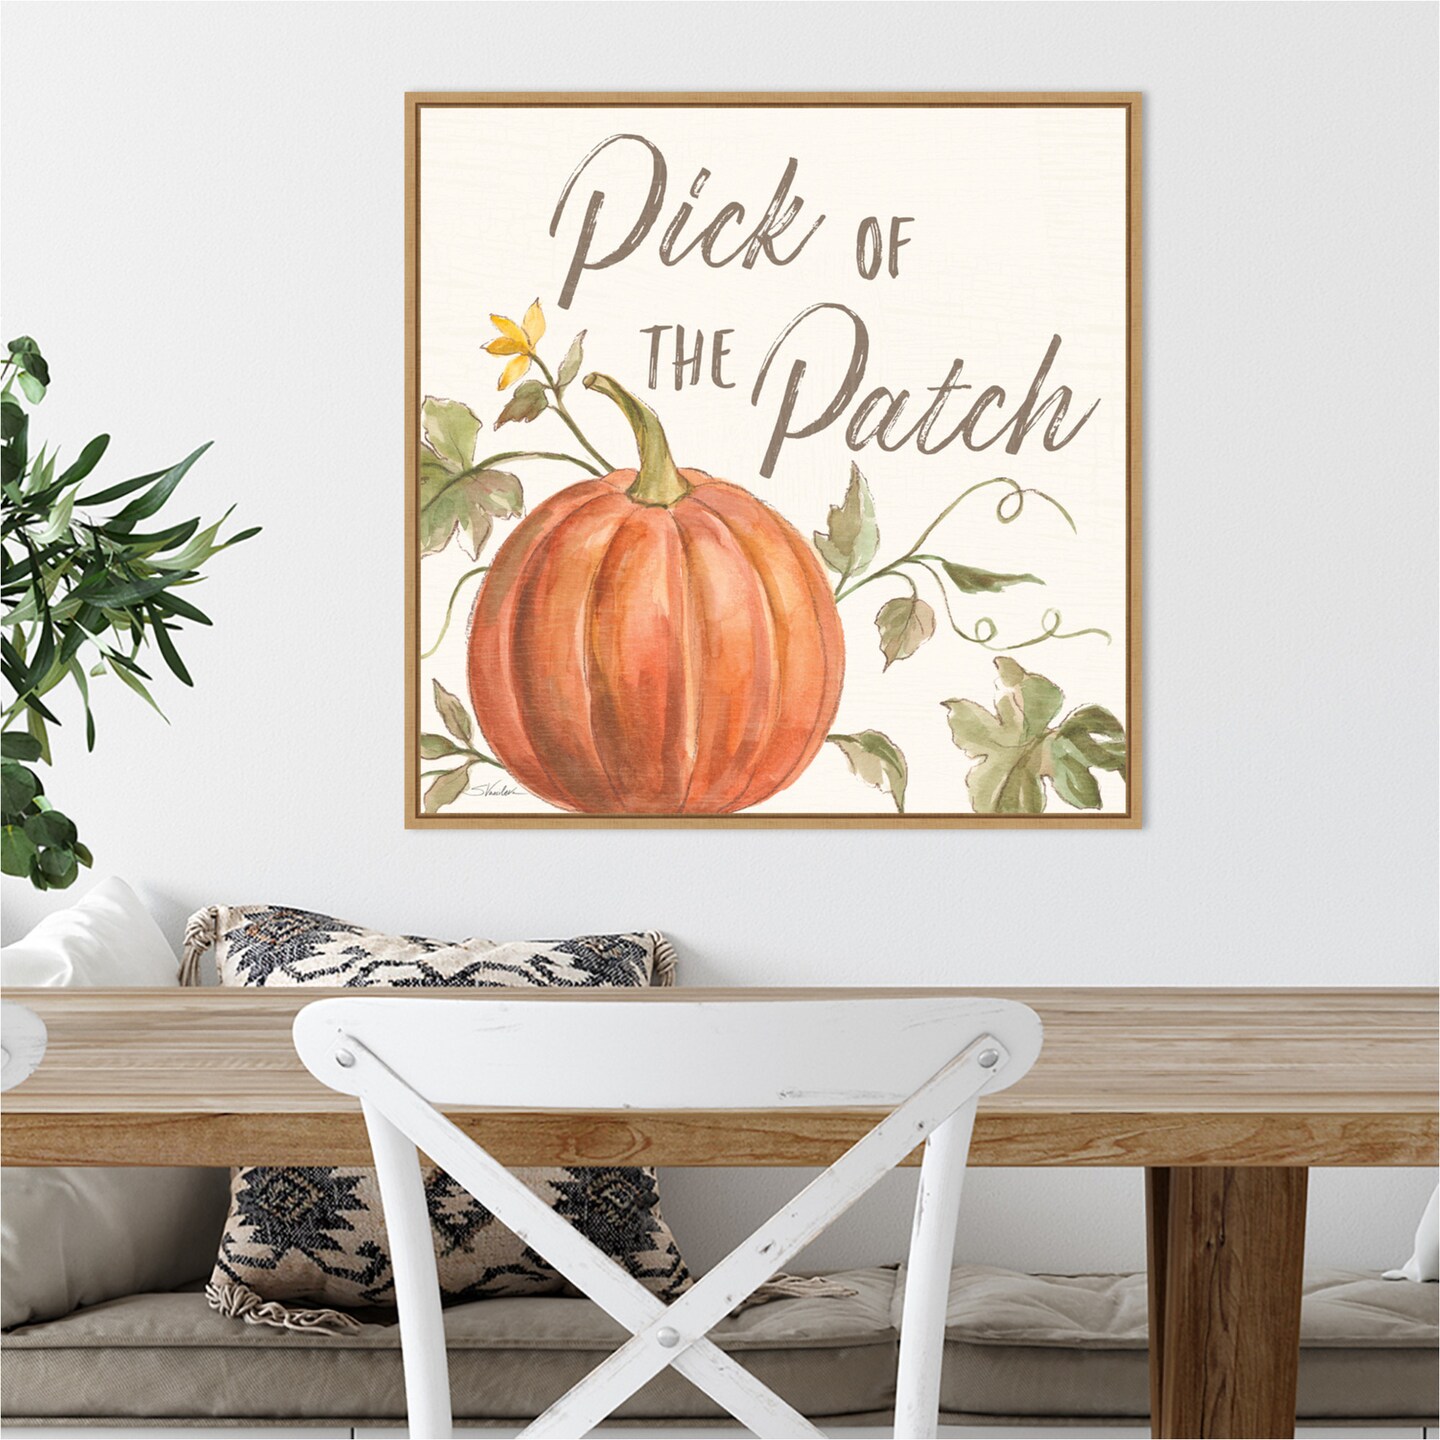 Happy Harvest VIII by Silvia Vassileva 22-in. W x 22-in. H. Canvas Wall Art Print Framed in Natural